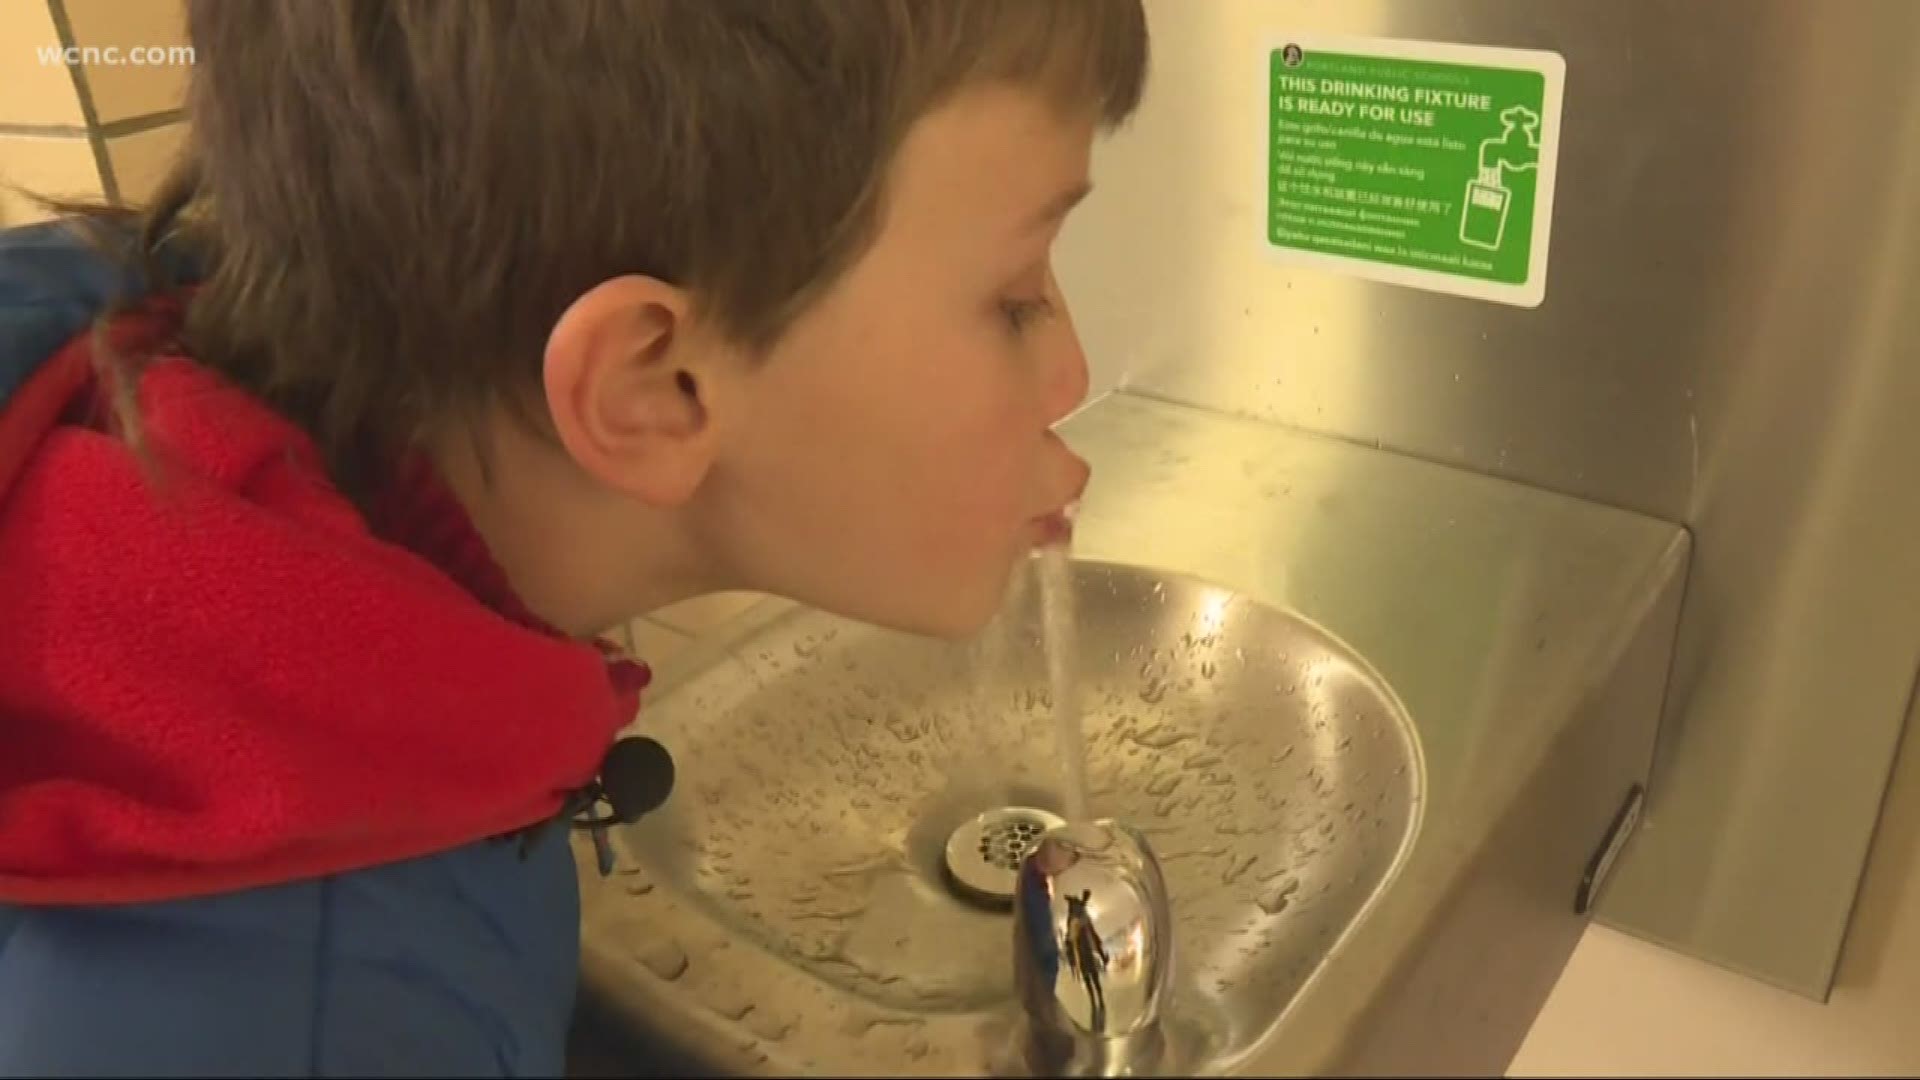 CMS will voluntarily test 35 more schools for lead in water